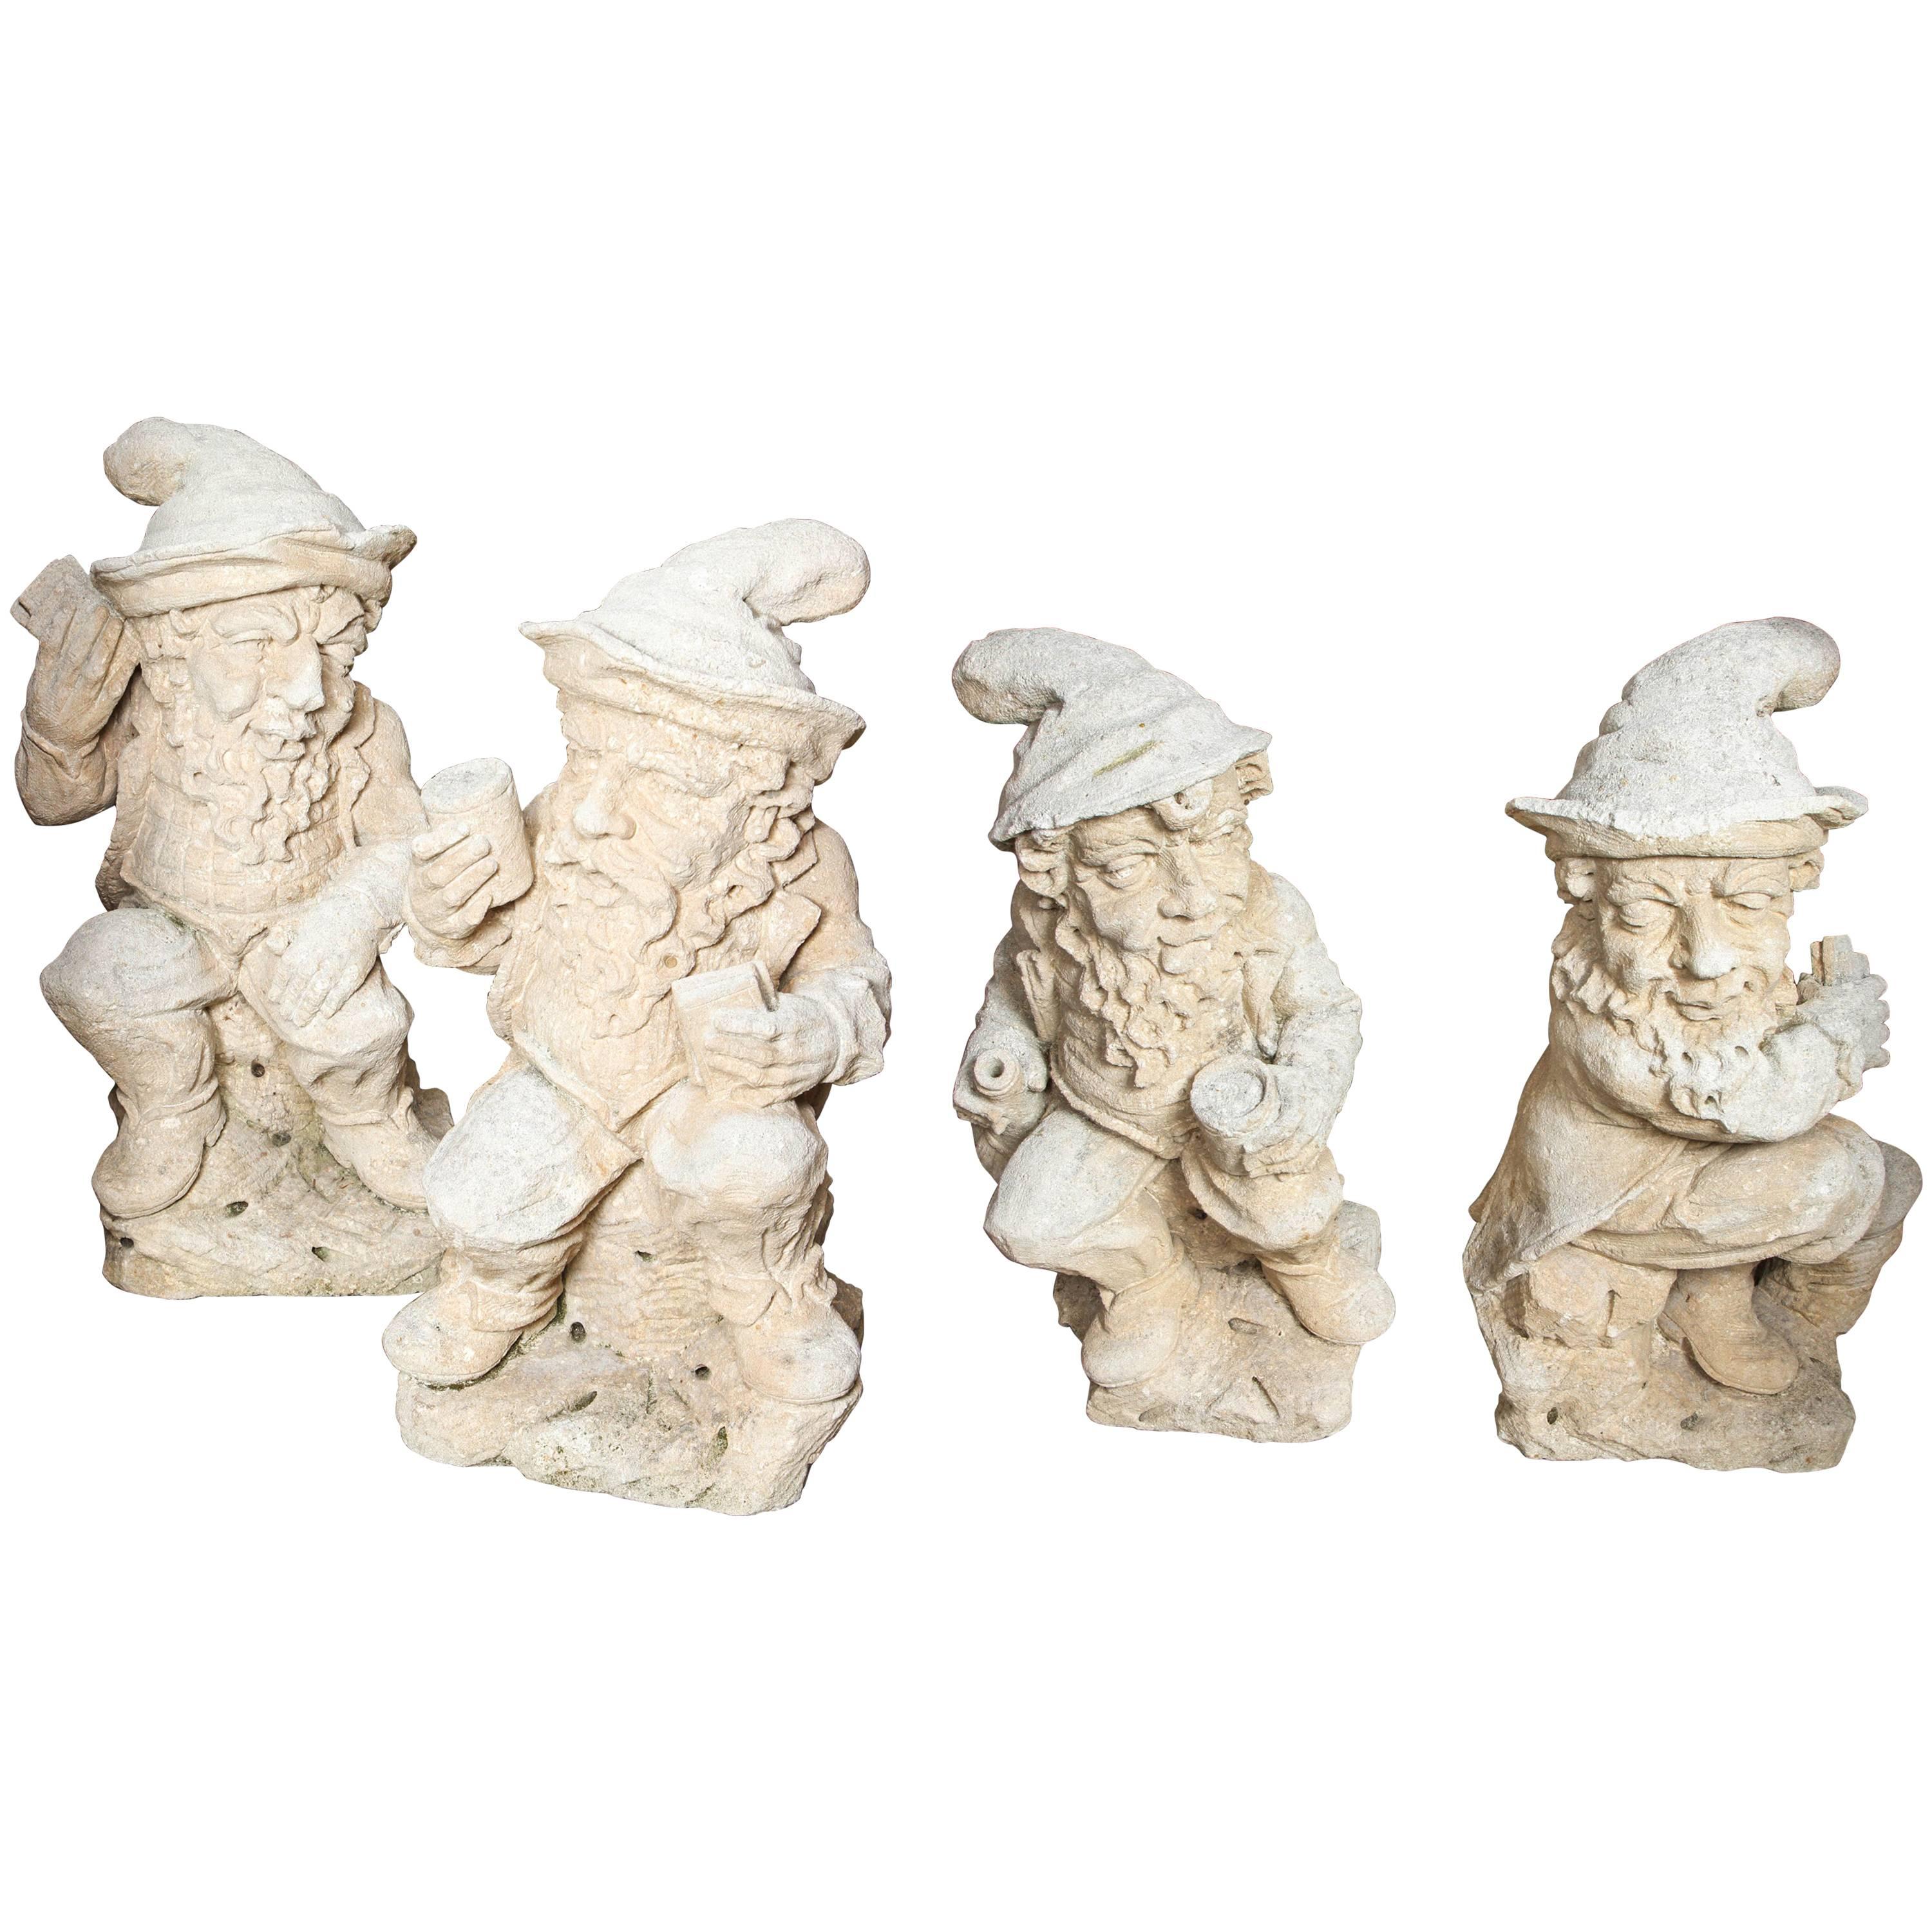 Group of Four French Carved Limestone Gnomes from the Early 1900s